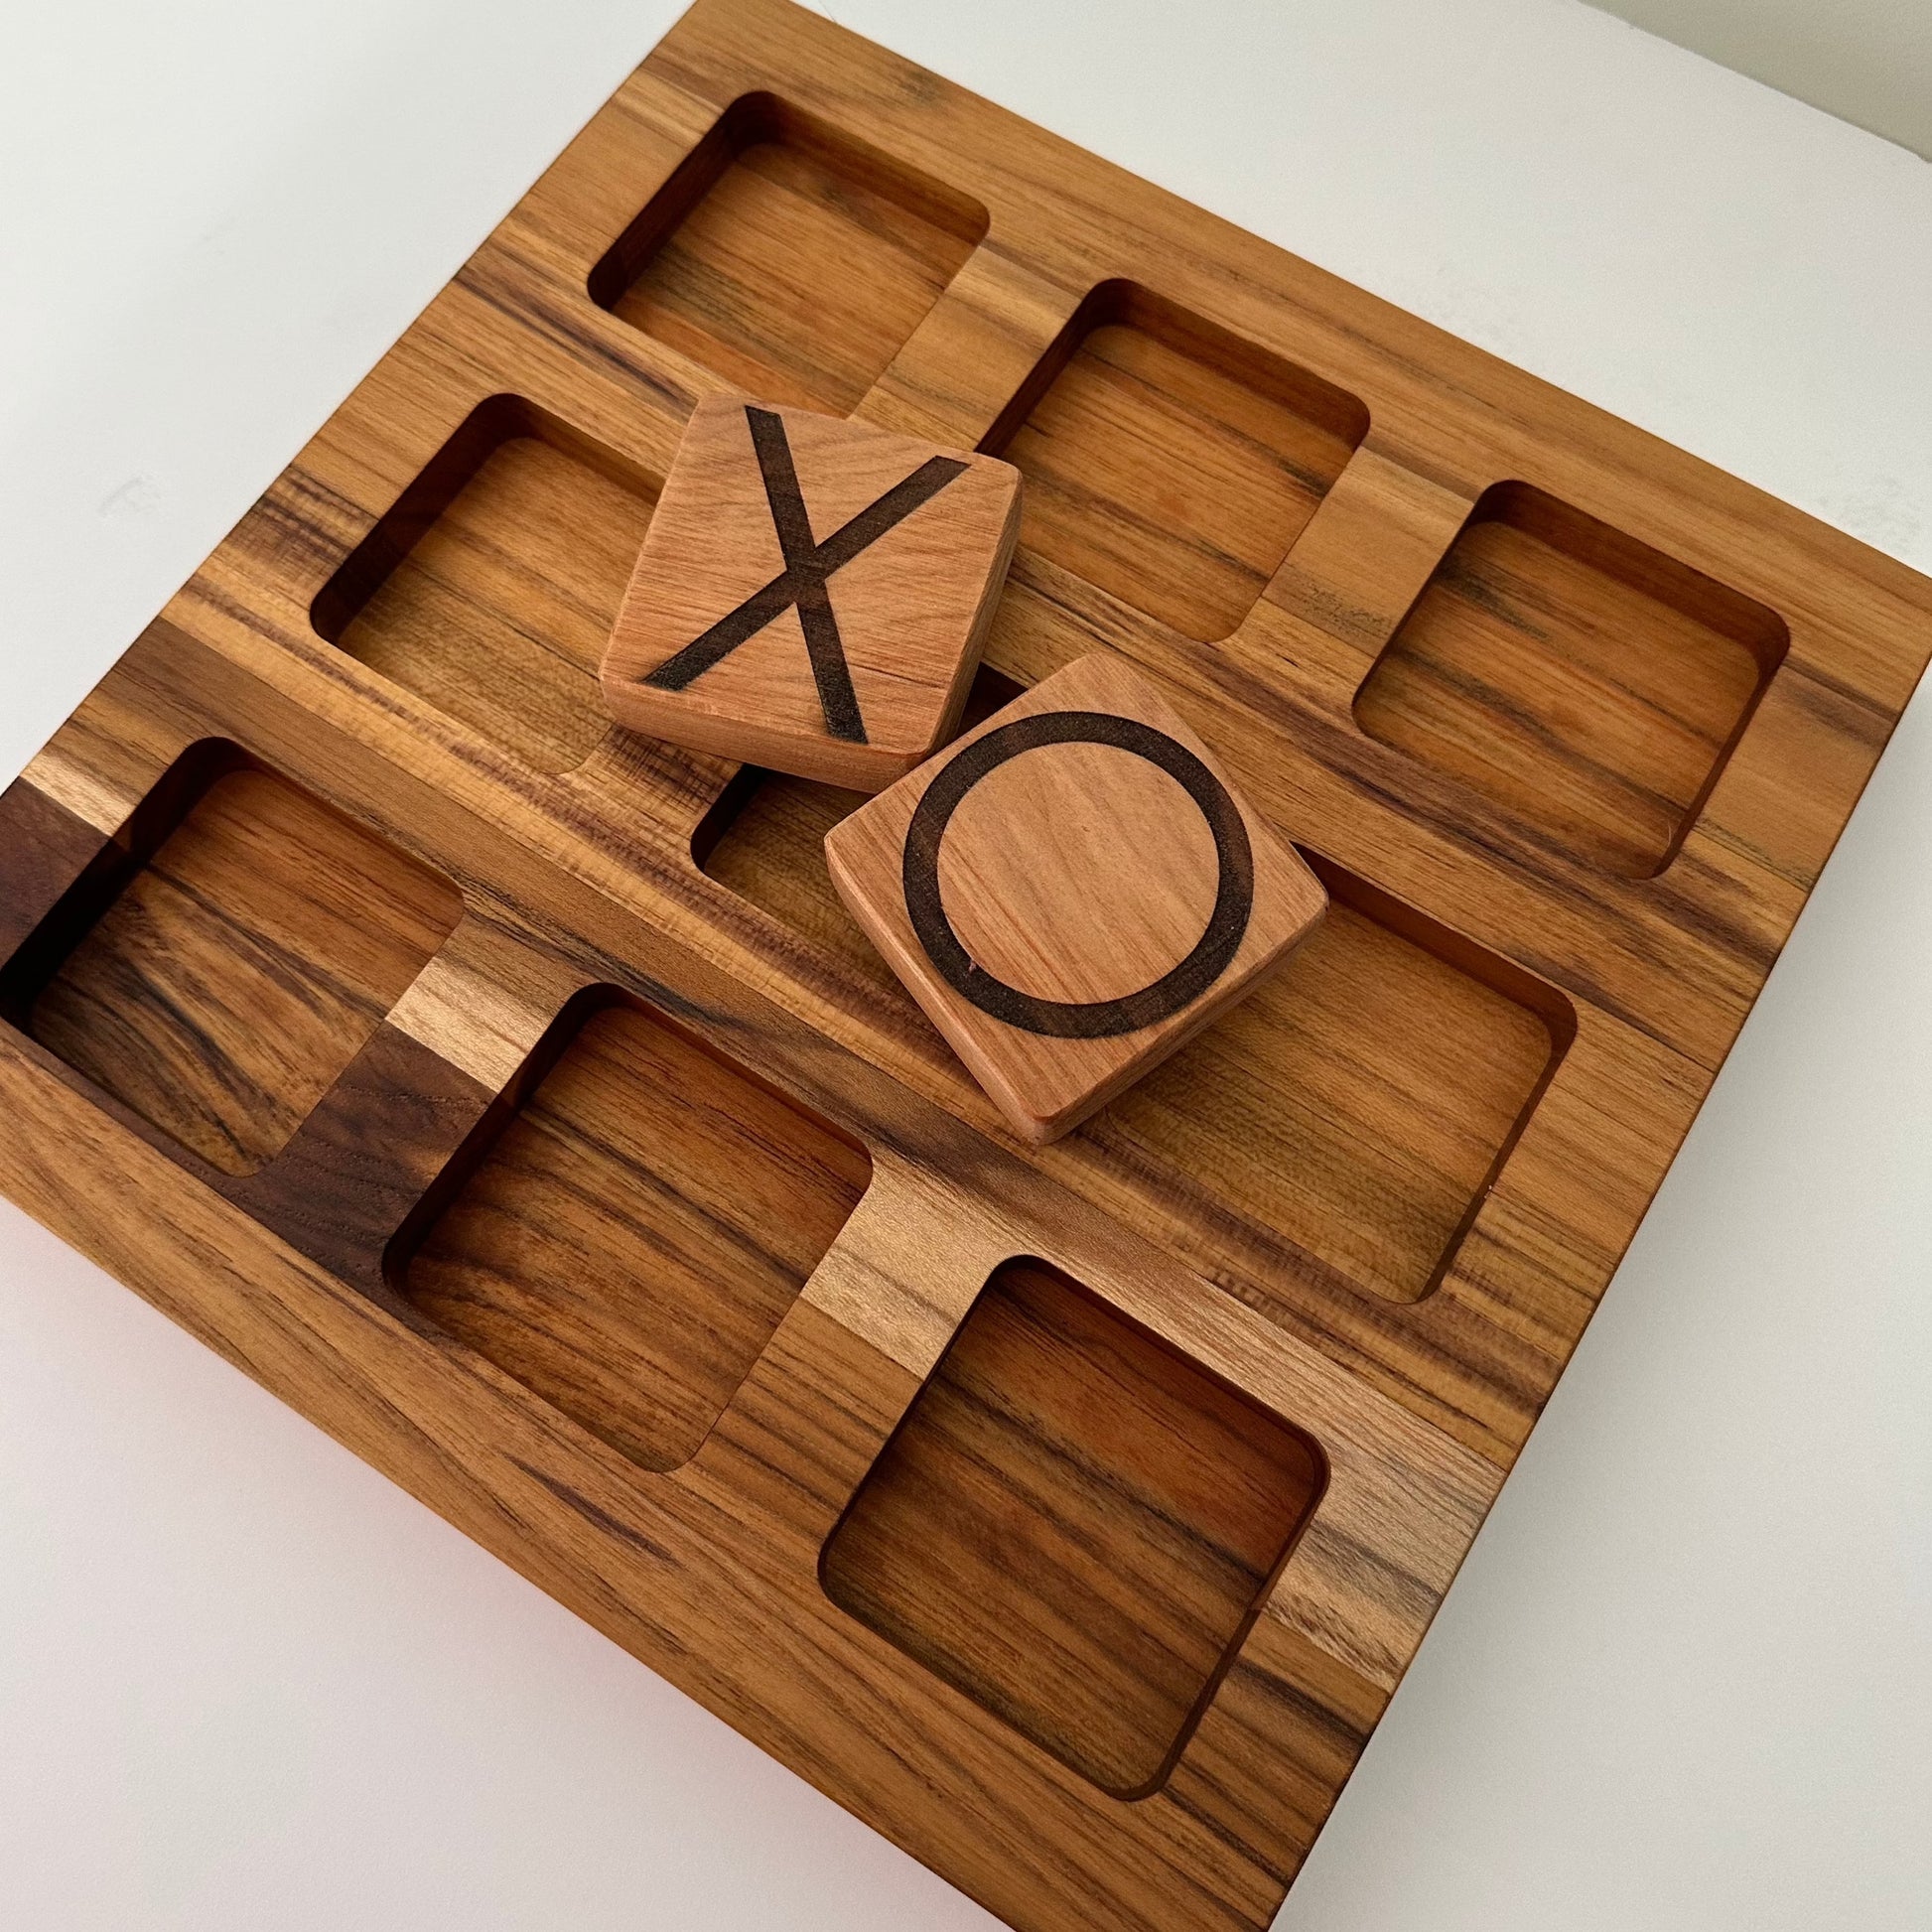 wooden handcrafted personalized tic-tac-toe set - add your name, initials or a custom design